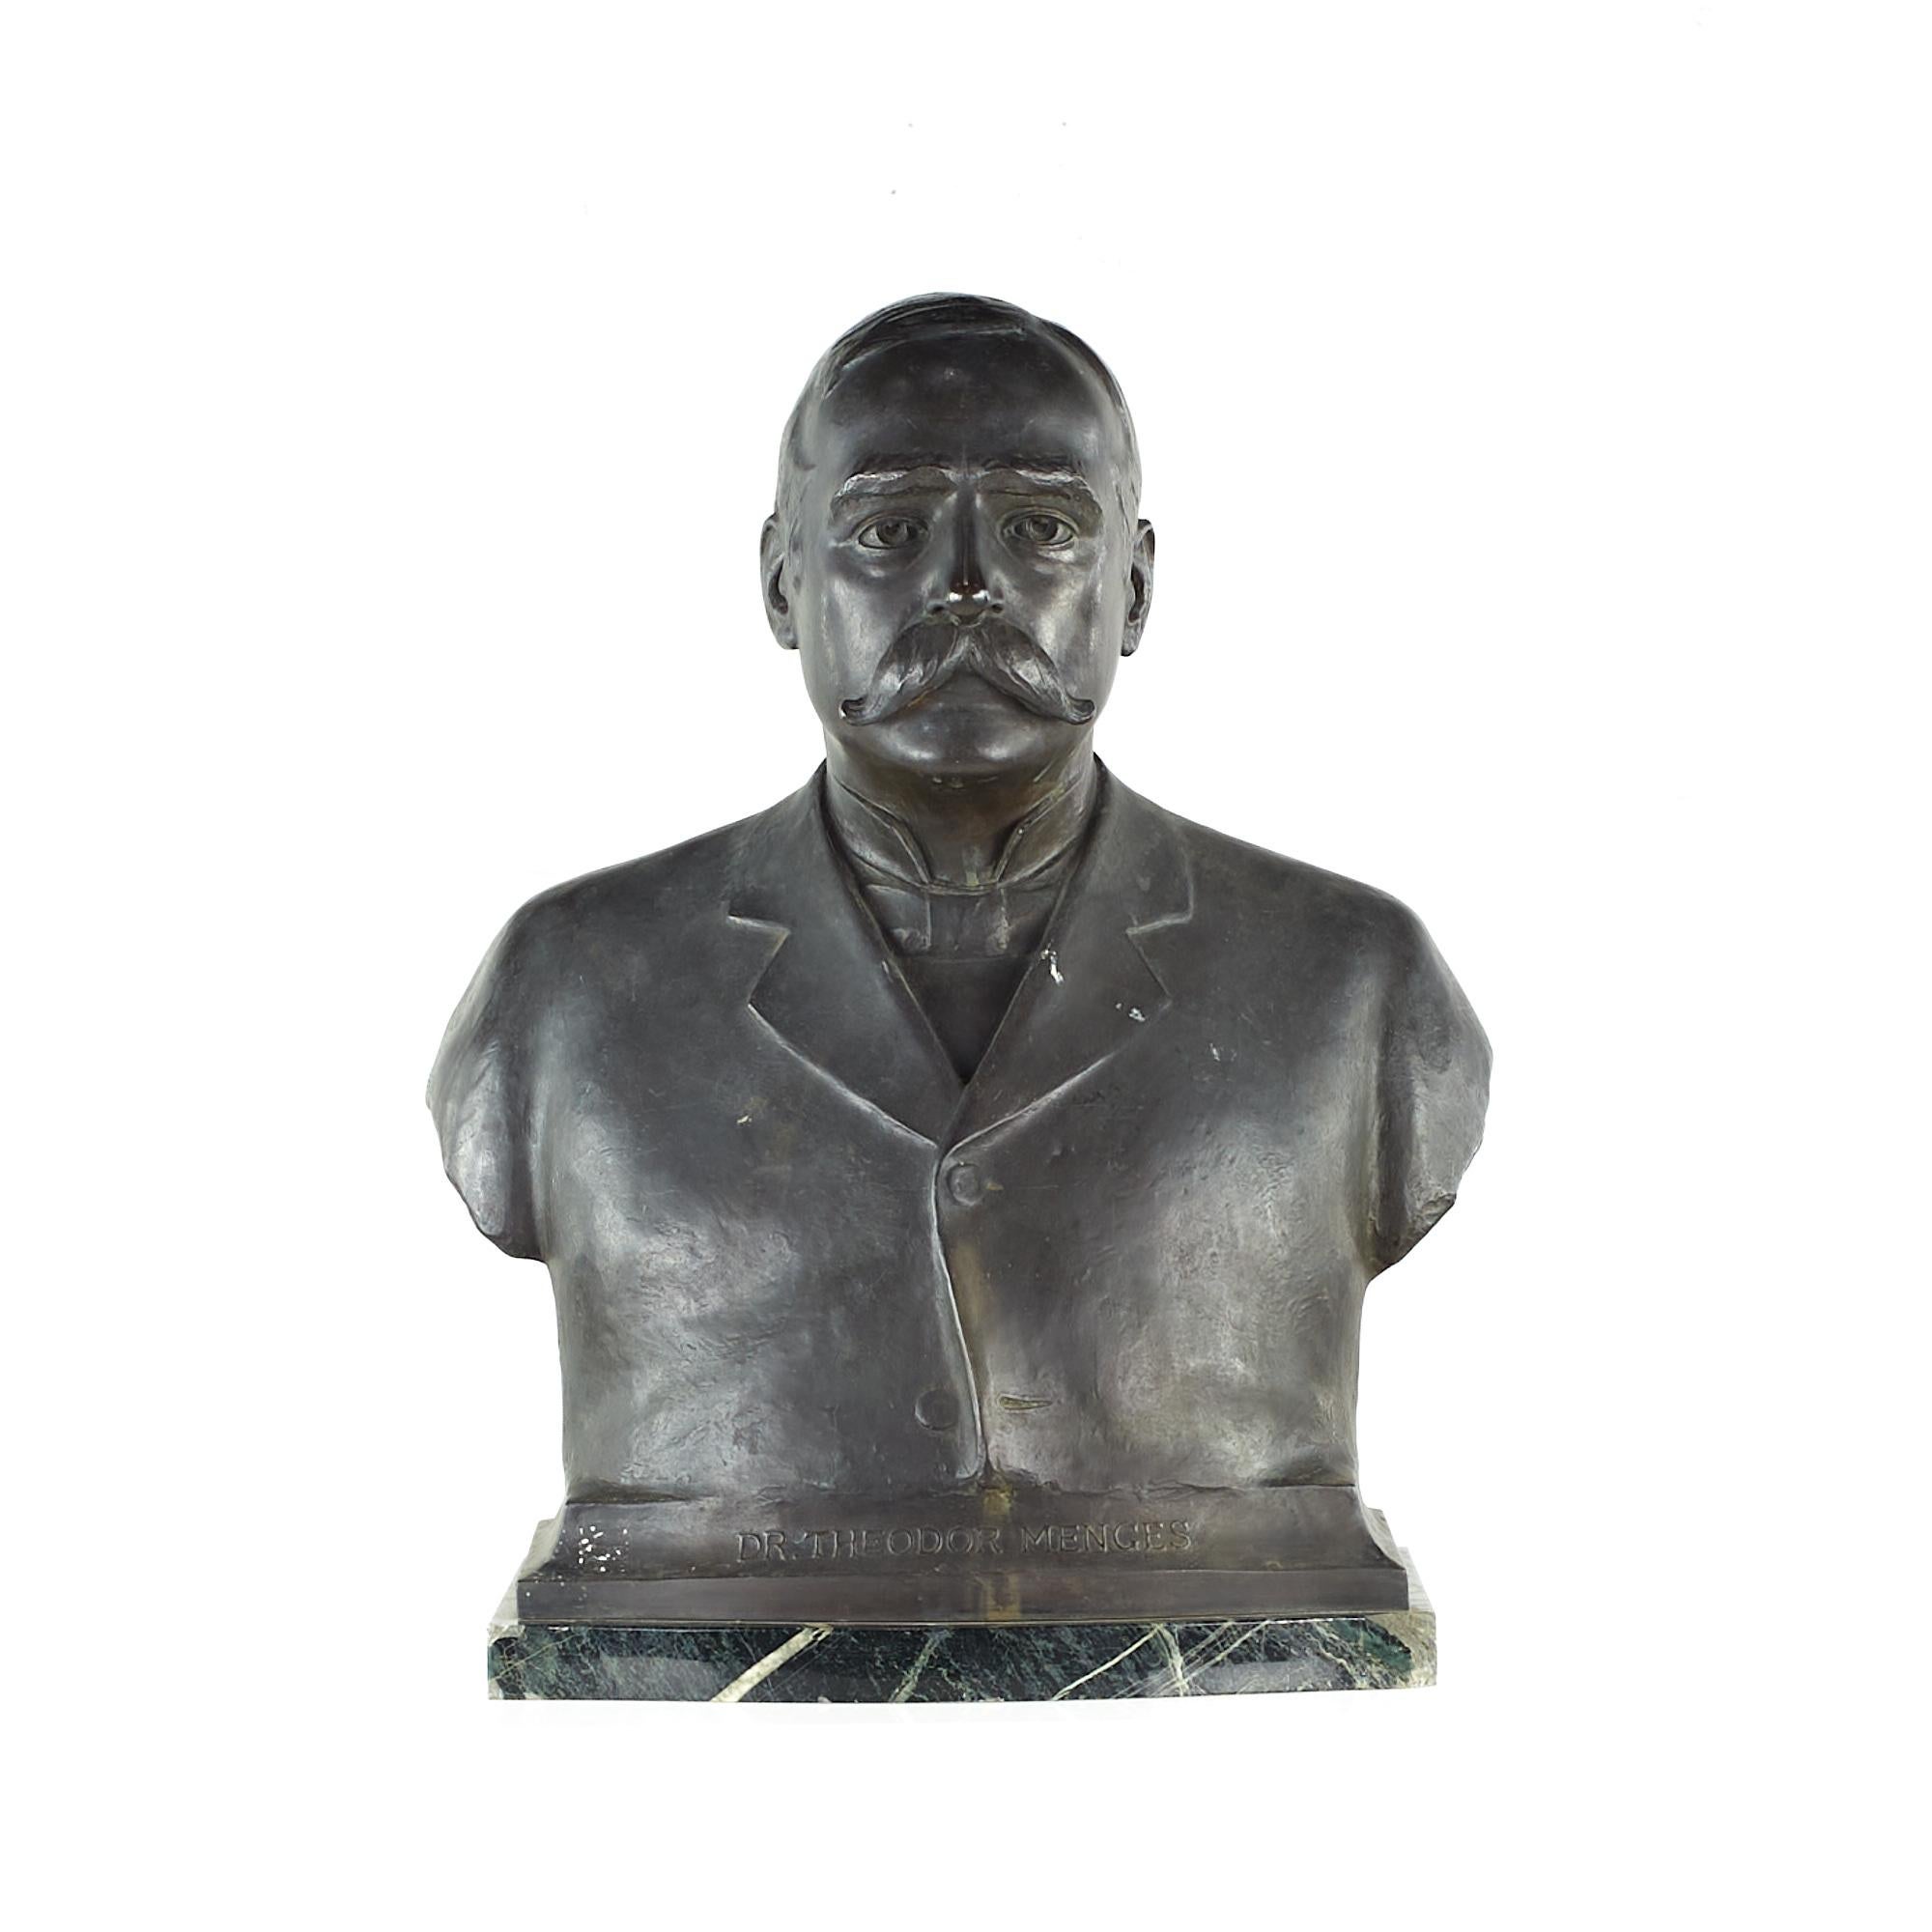 Richard Walter Bock Bronze Bust of Theodor Menges Sculpture on Marble Base

This sculpture measures: 20.75 wide x 13 deep x 26 inches high
This bust is in Good Vintage Condition with some minor scuffs on the bust and minor chips in the marble.

We